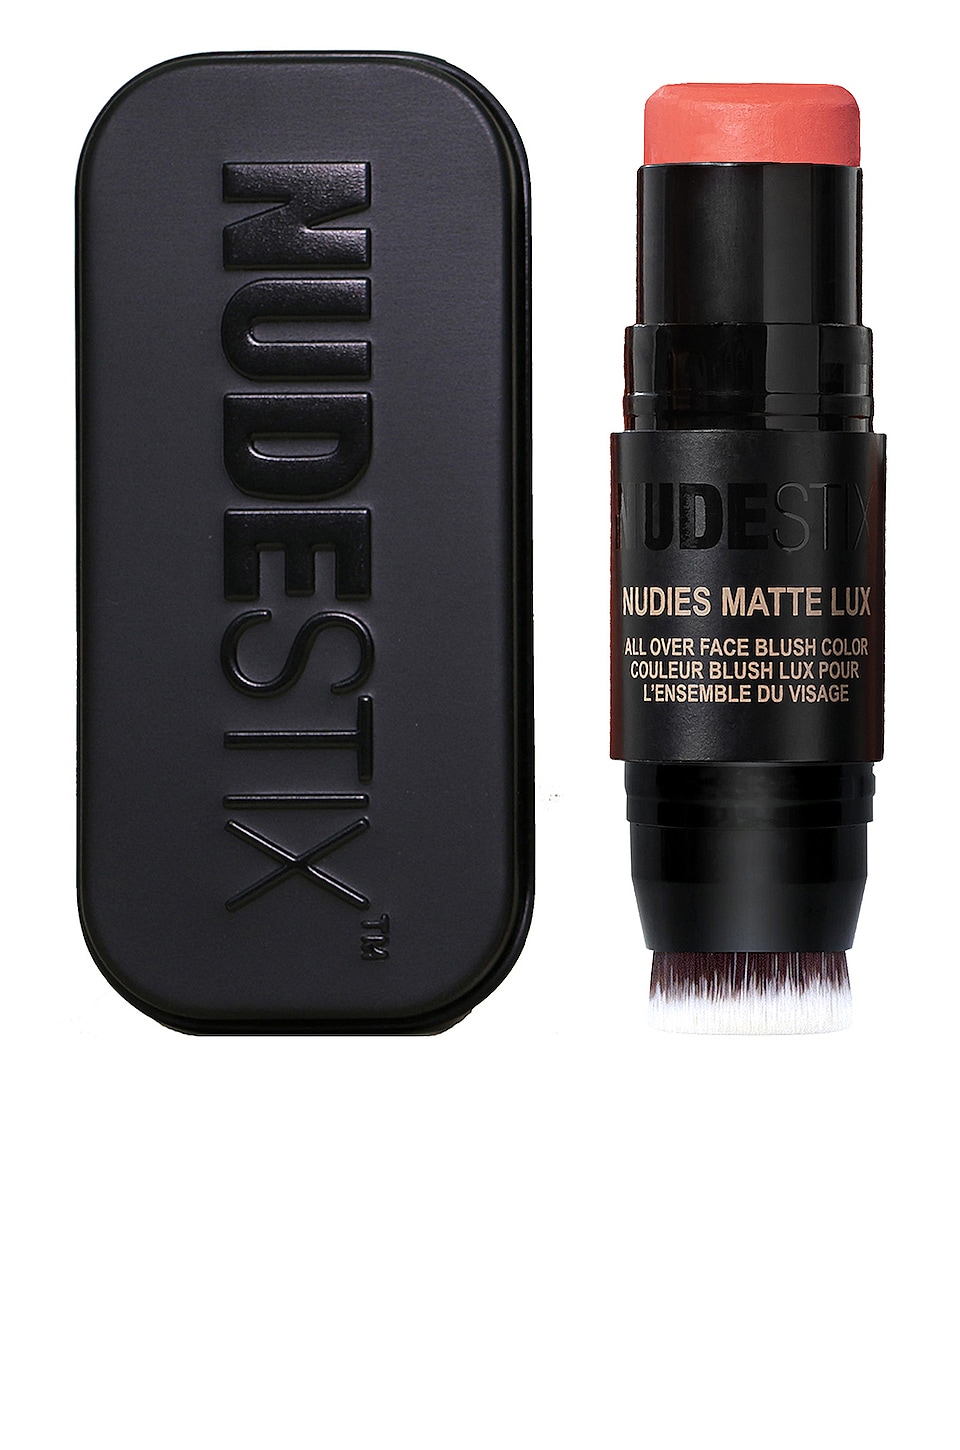 Румяна NUDESTIX Nudies Matte Lux All Over Face Blush, цвет Juicy Melons